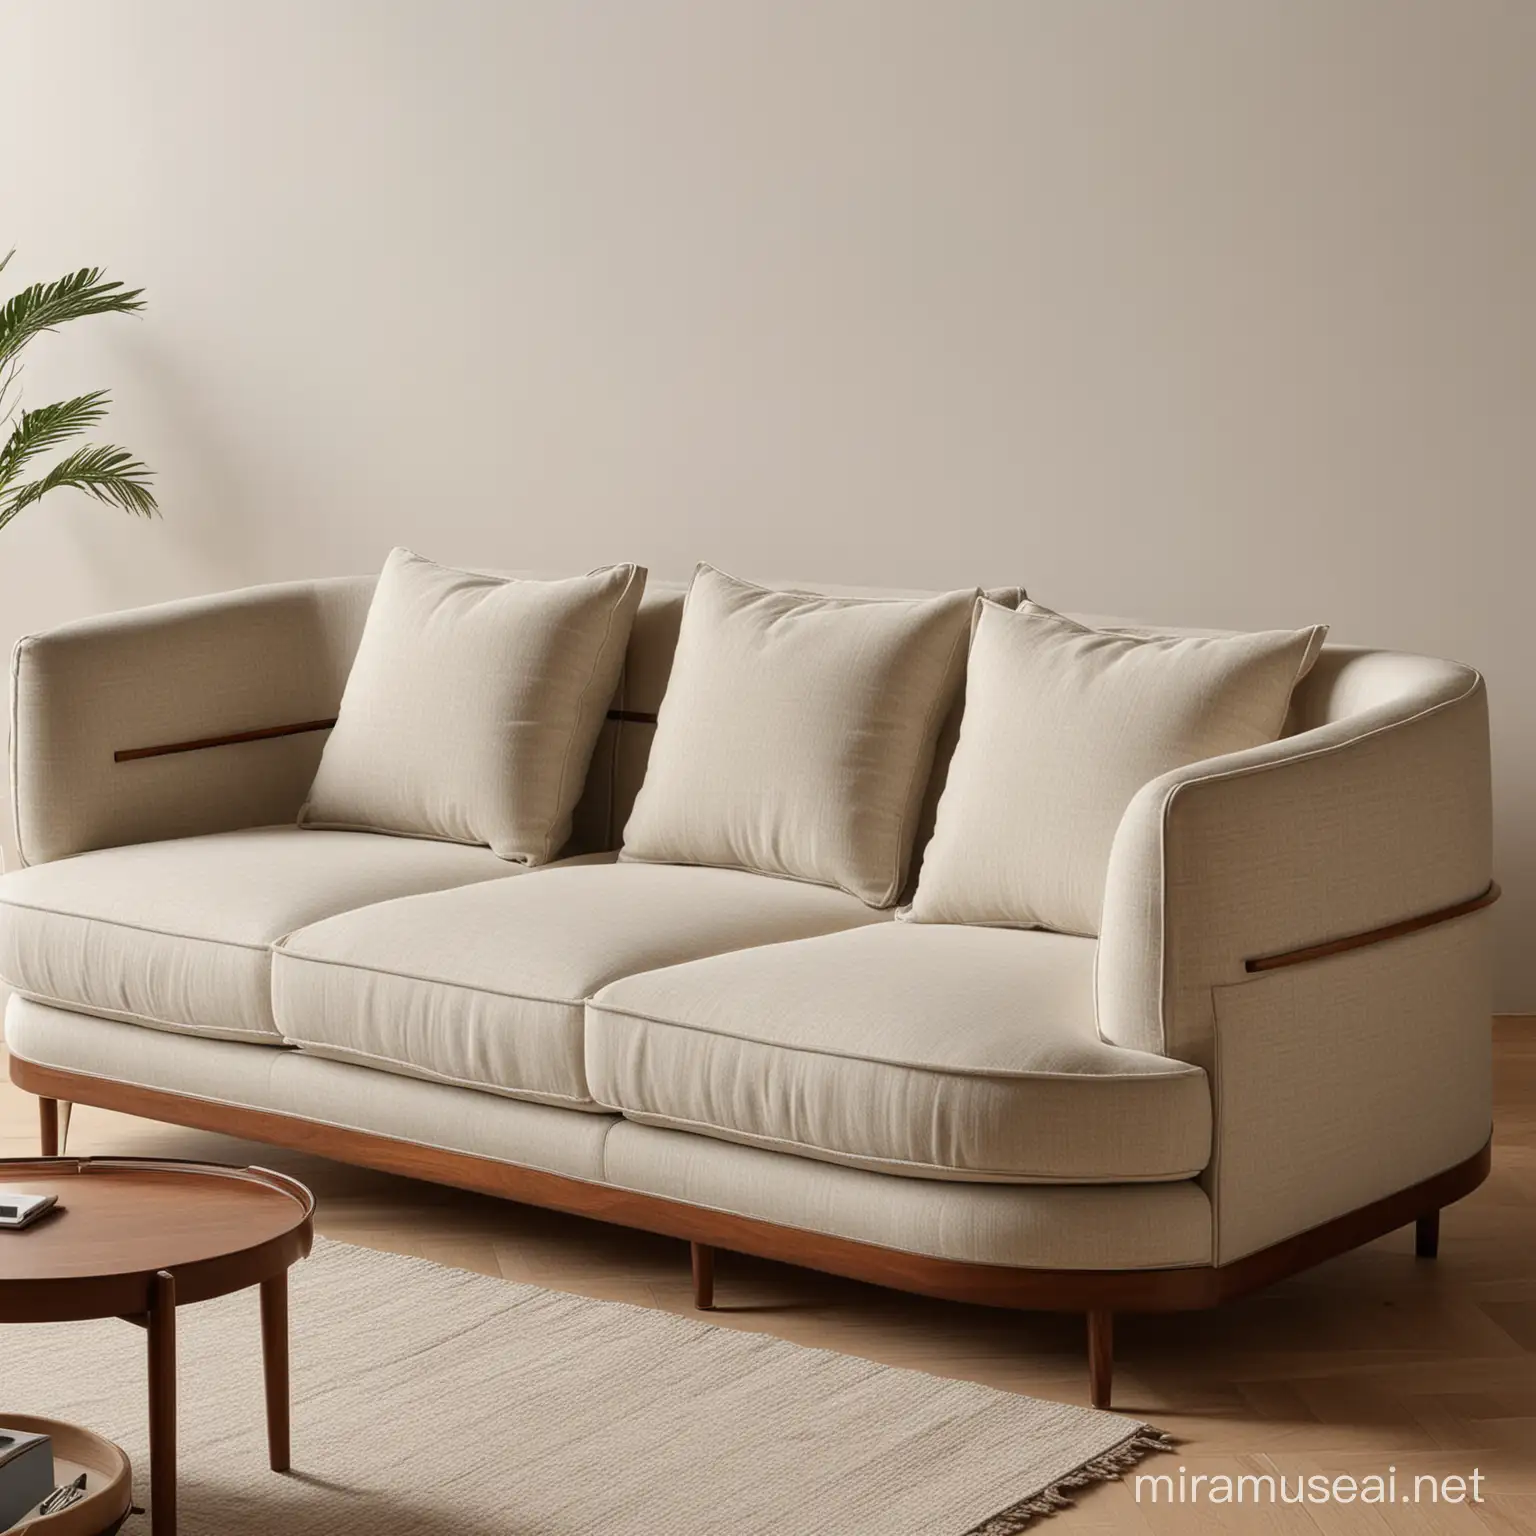 Modern 3Seat Sofa Set with Oval Lines and Geometric Armrests